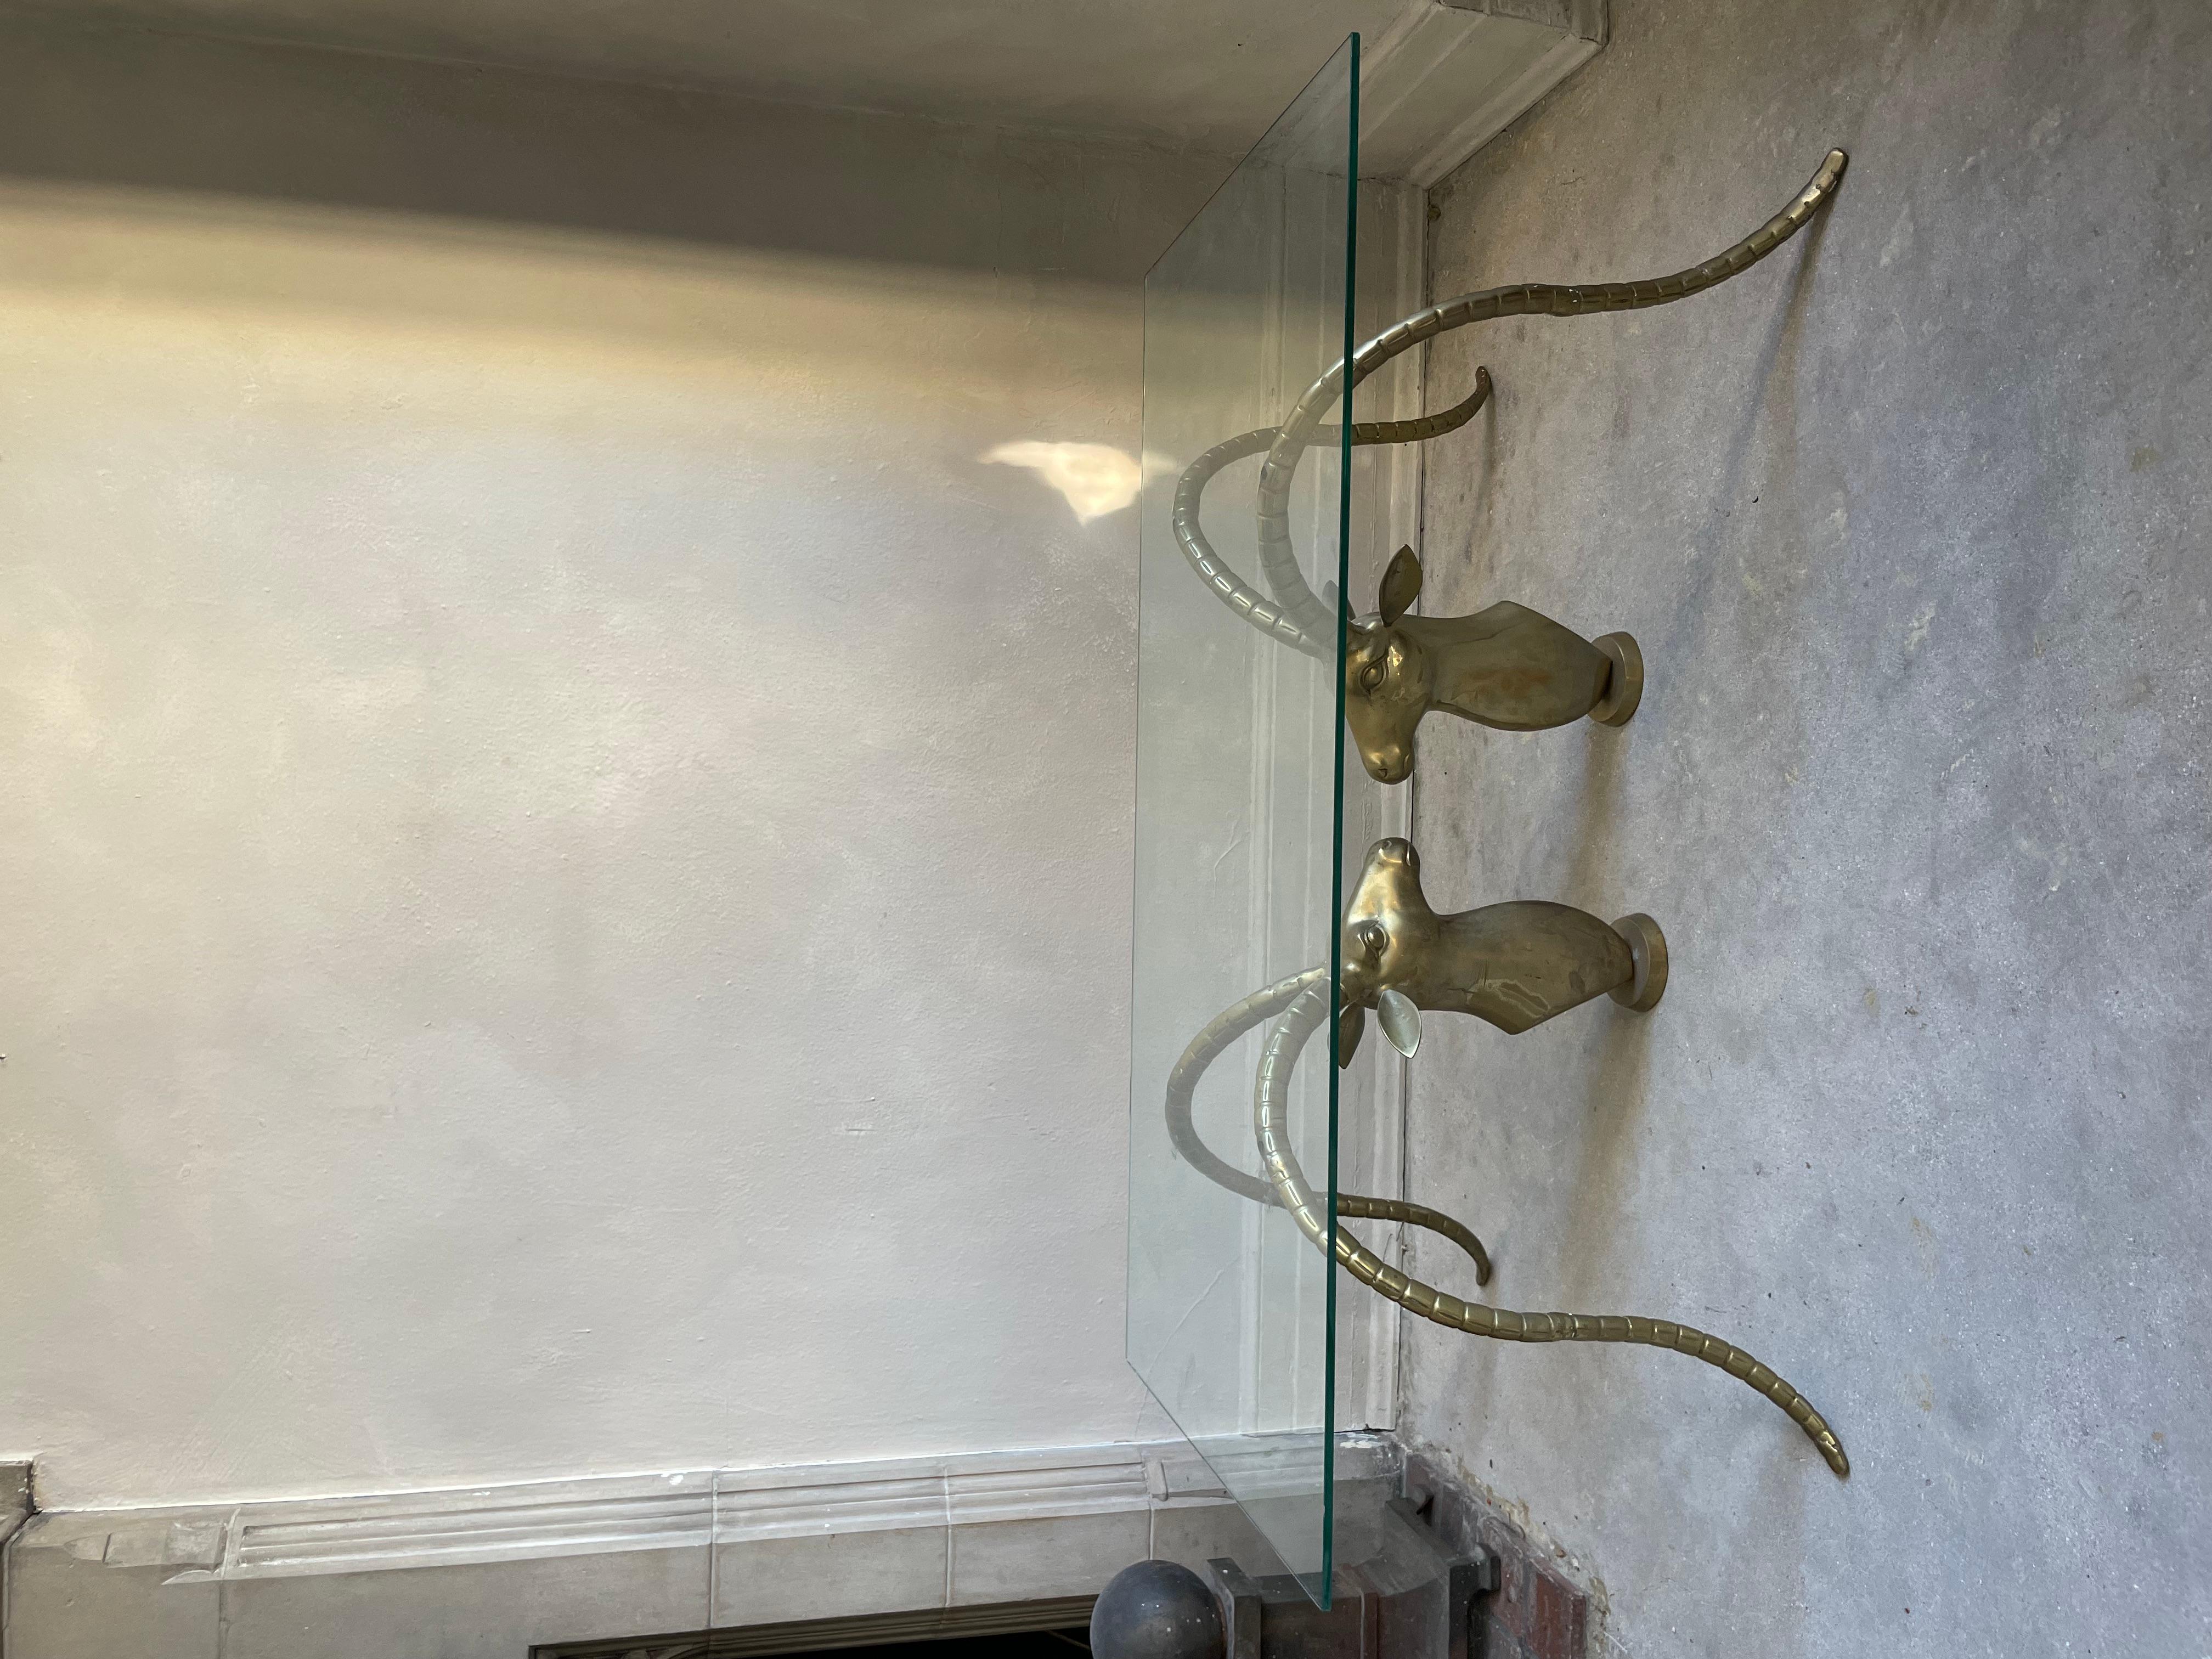 Gorgeous Art Deco table featuring large ram busts with elongated antlers. Base is made of solid brass showing a gorgeous and natural patina from use over time. A true statement piece that will surely turn heads and start many conversations.

In